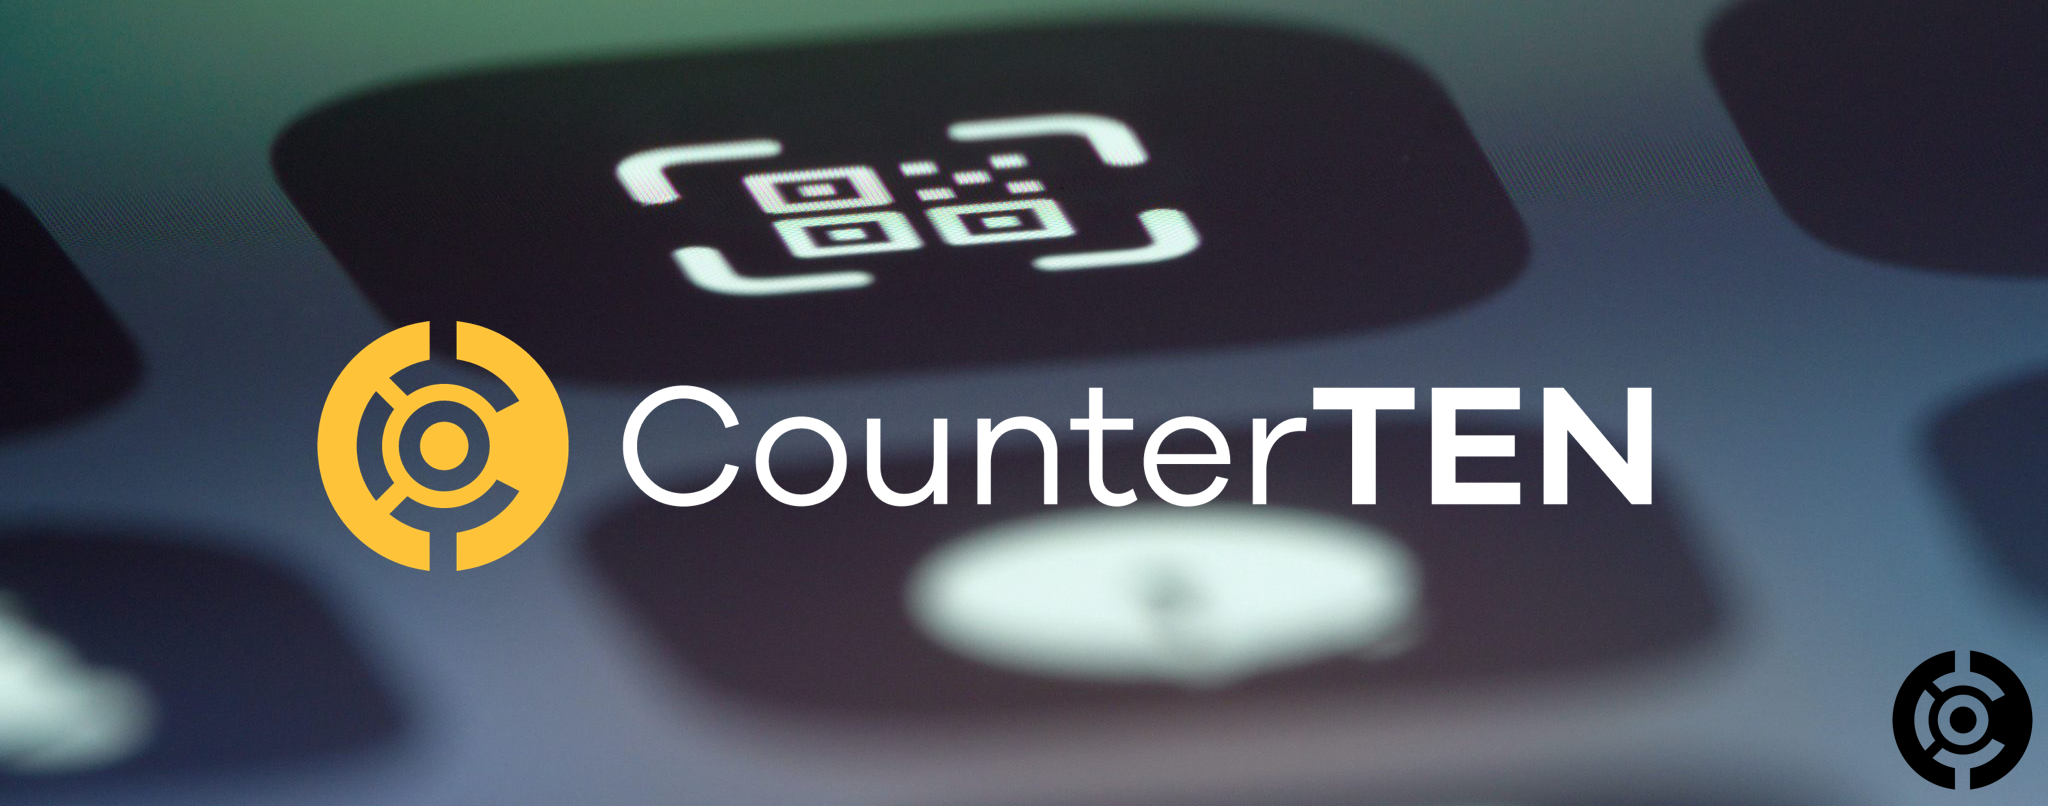 Download NFTs to your Apple Wallet | Verify NFTs with a QR Code | CounterTEN